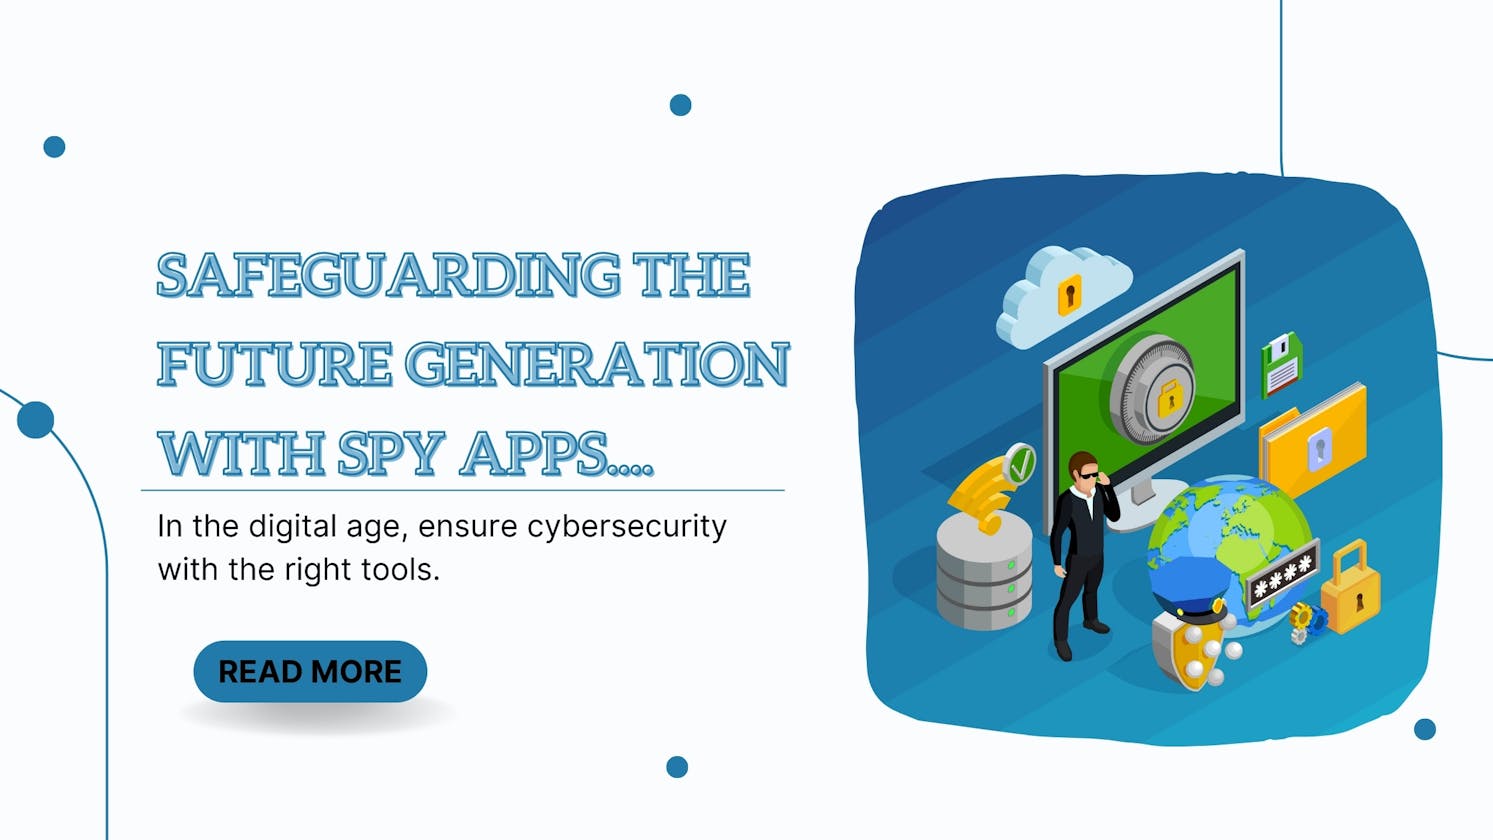 Safeguarding the Future Generation with Spy Apps